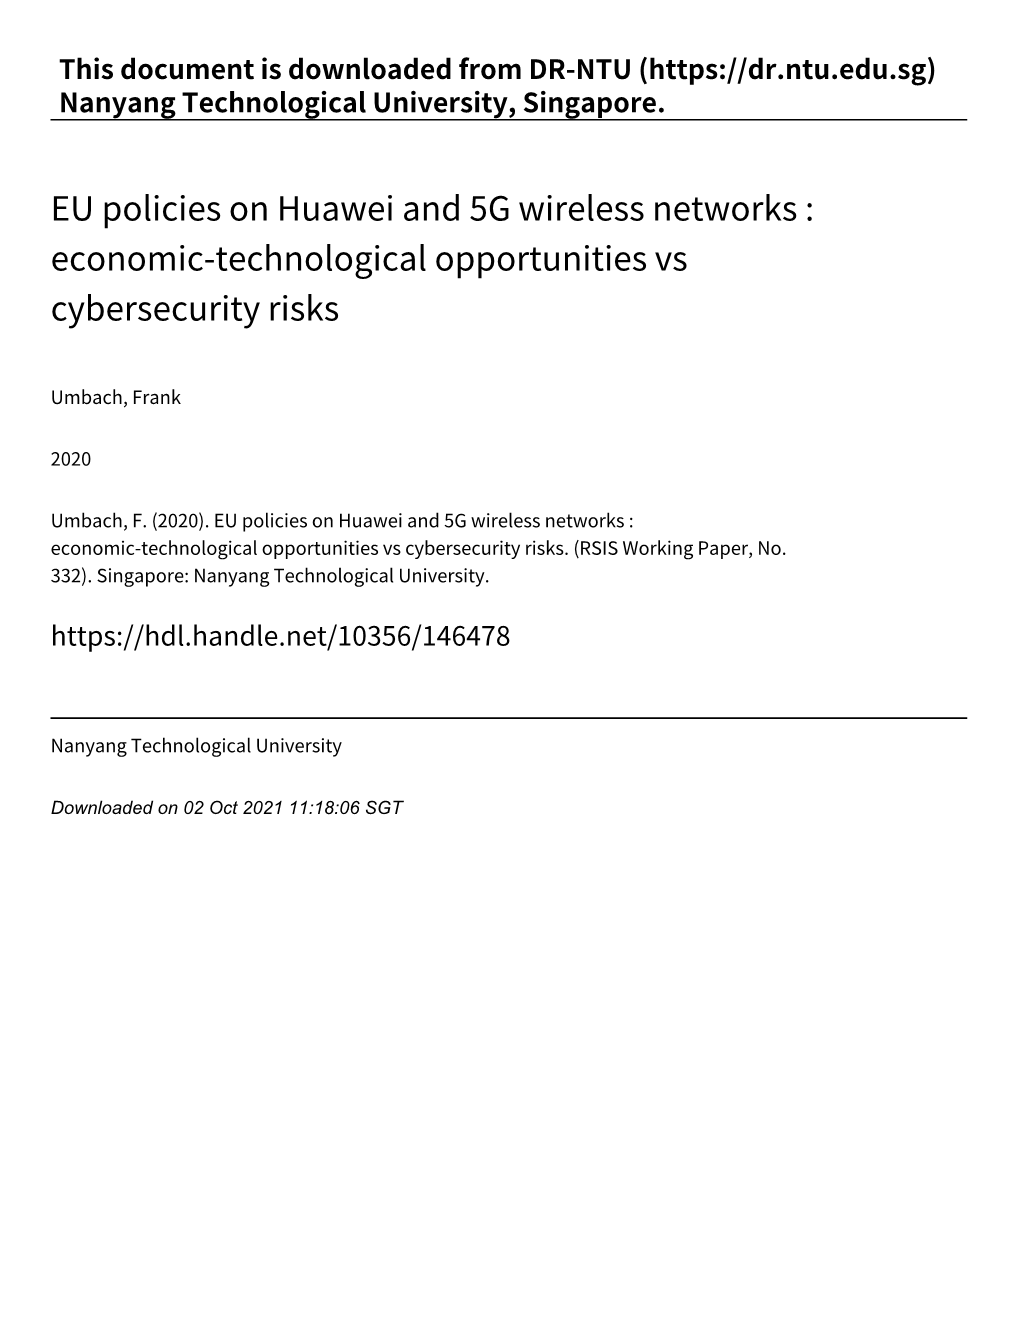 EU Policies on Huawei and 5G Wireless Networks : Economic‑Technological Opportunities Vs Cybersecurity Risks